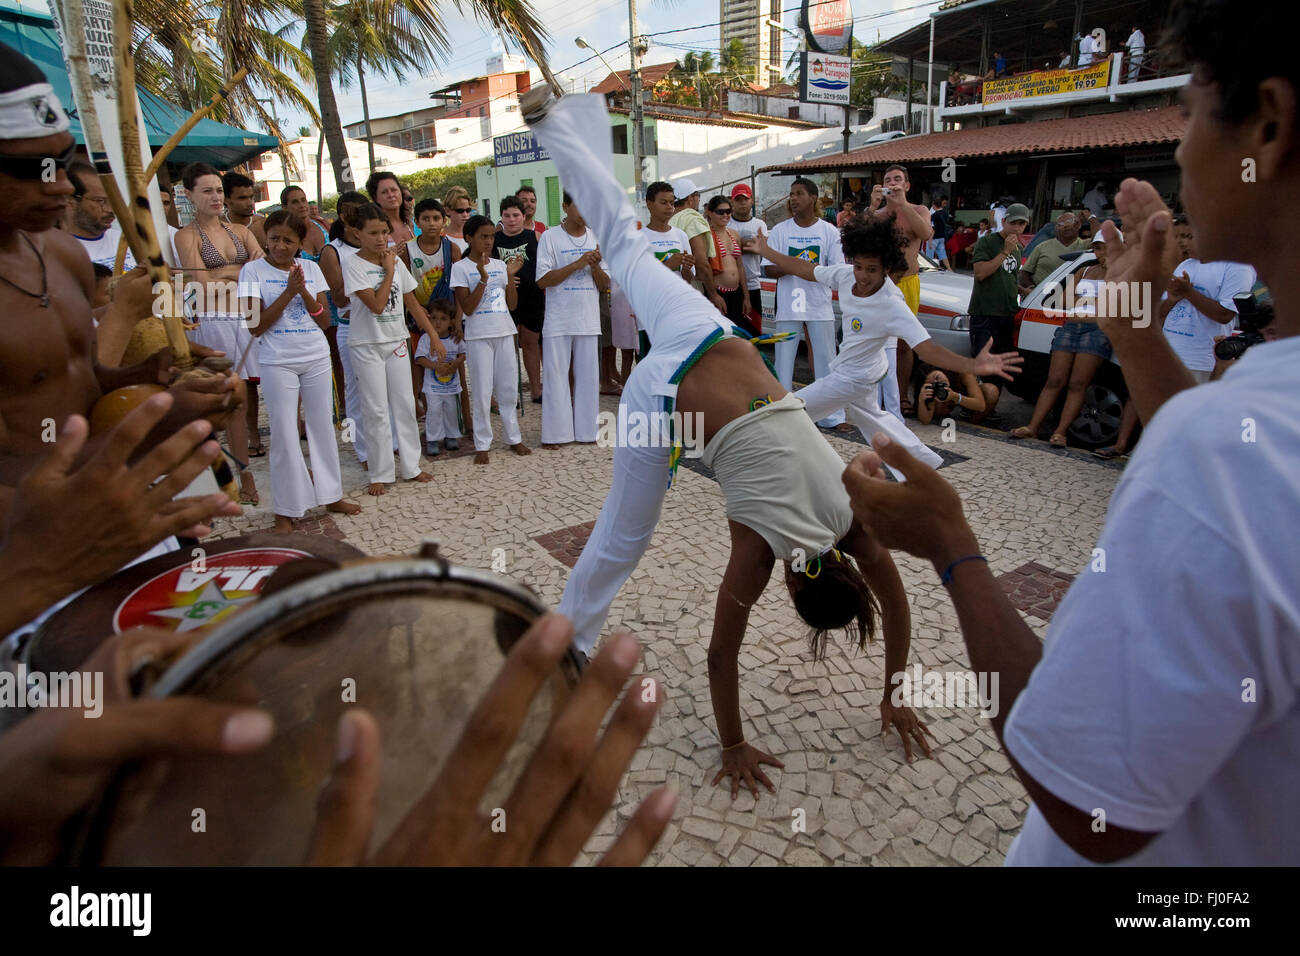 Capoeira, a Brazilian martial art that combines elements of dance, acrobatics and music, and is usually referred to as a game - known for quick and complex moves, using mainly power, speed, and leverage for a wide variety of kicks, spins, and highly mobile techniques - The Roda de capoeira is a circle formed by capoeiristas and capoeira musical instruments, where every participant sings the typical songs and claps their hands following the music - two capoeiristas enter the roda and play the game according to the style required by the musical instruments rhythm. Stock Photo